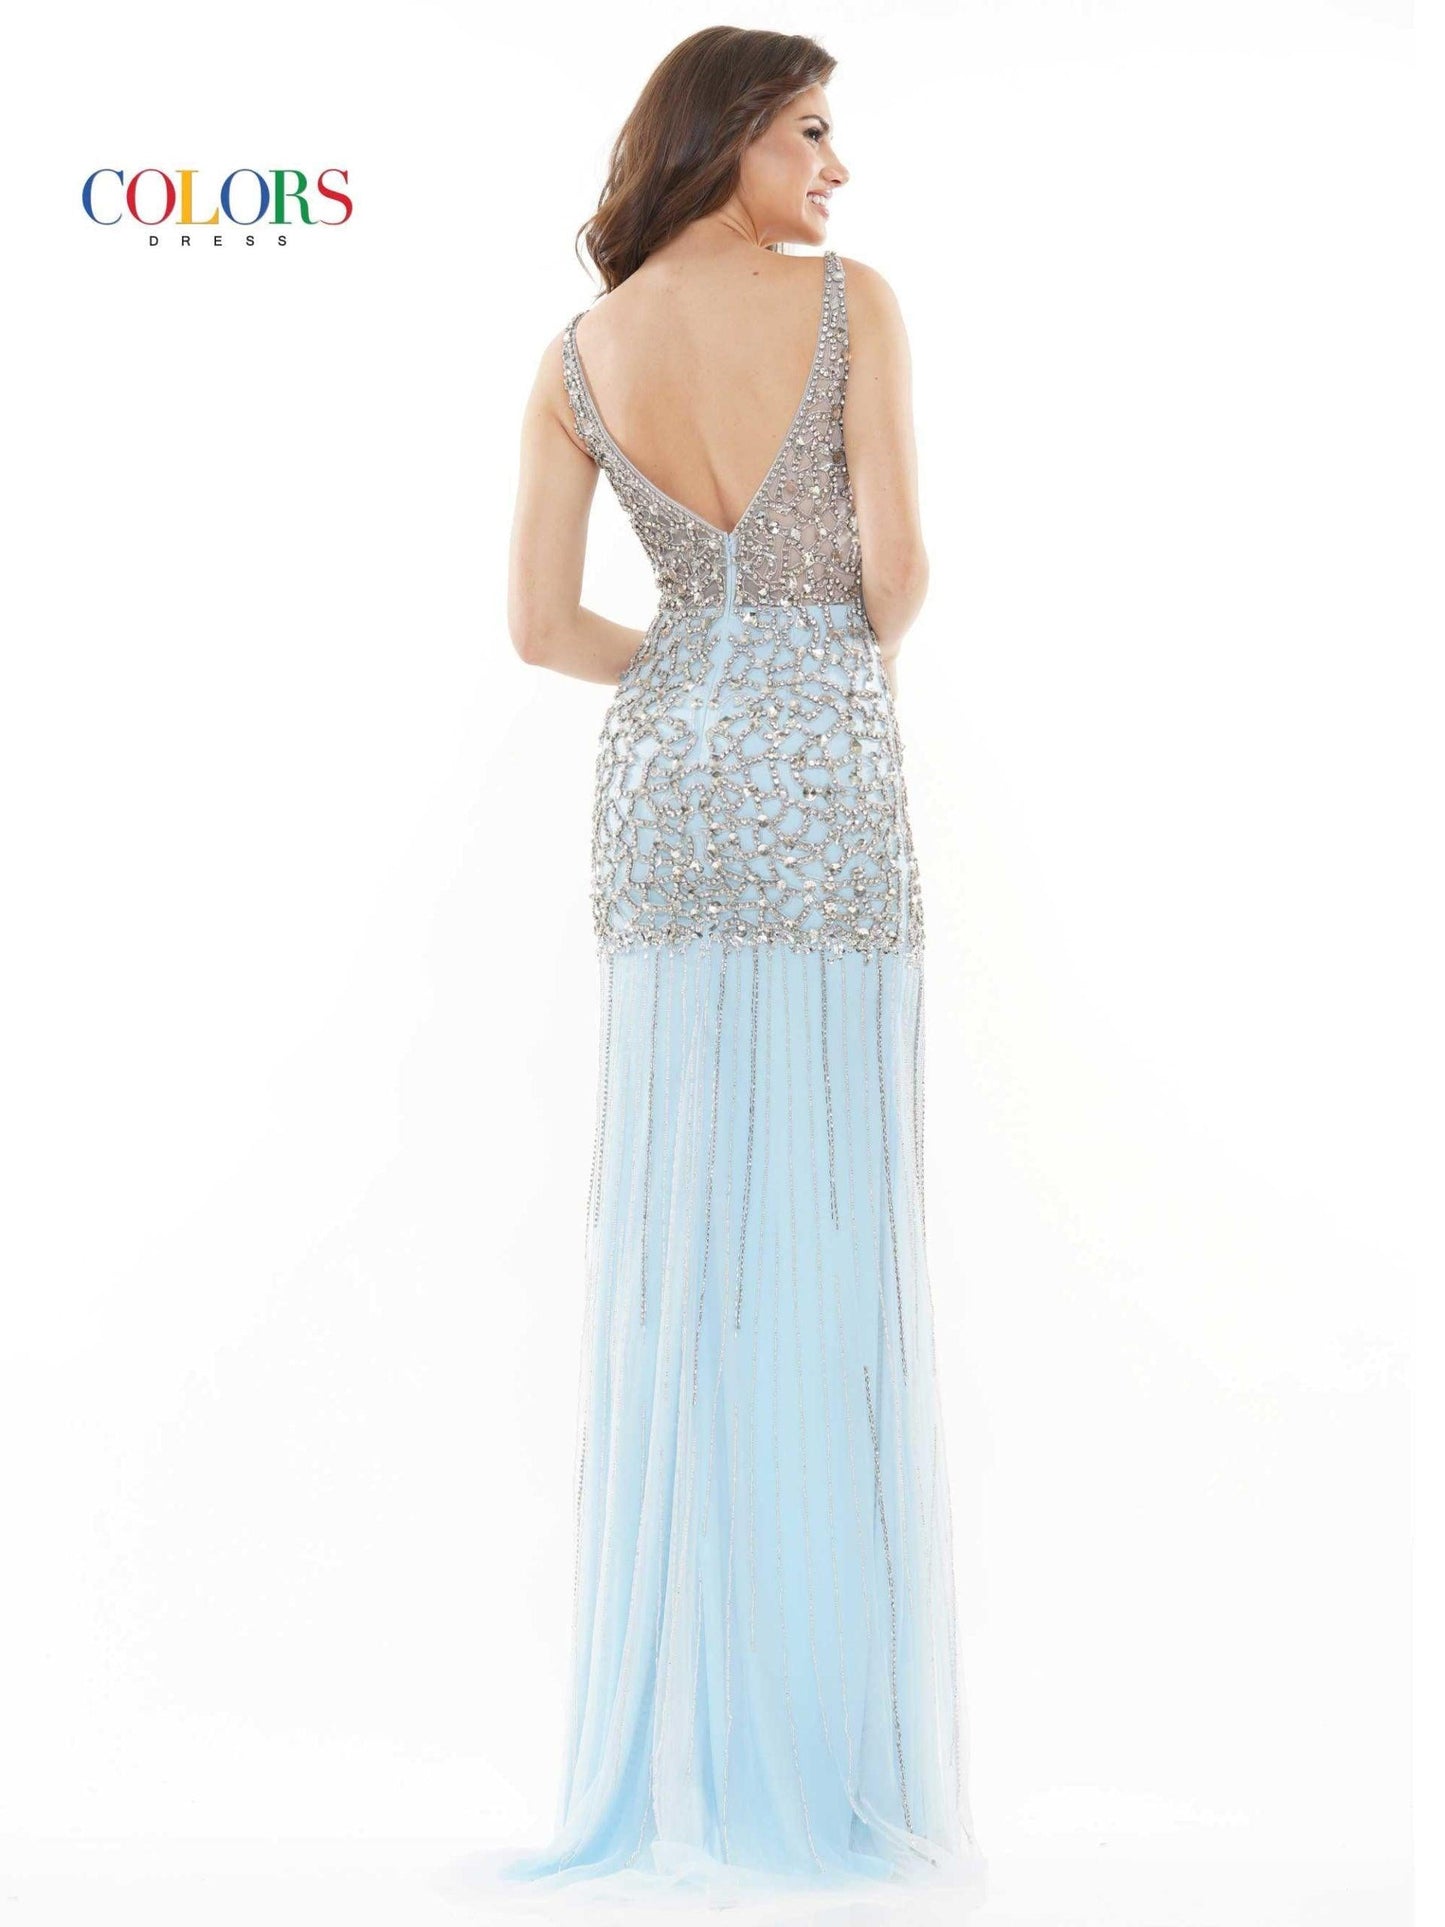 Colors Long Sleeveless Formal Prom Dress 2676 - The Dress Outlet